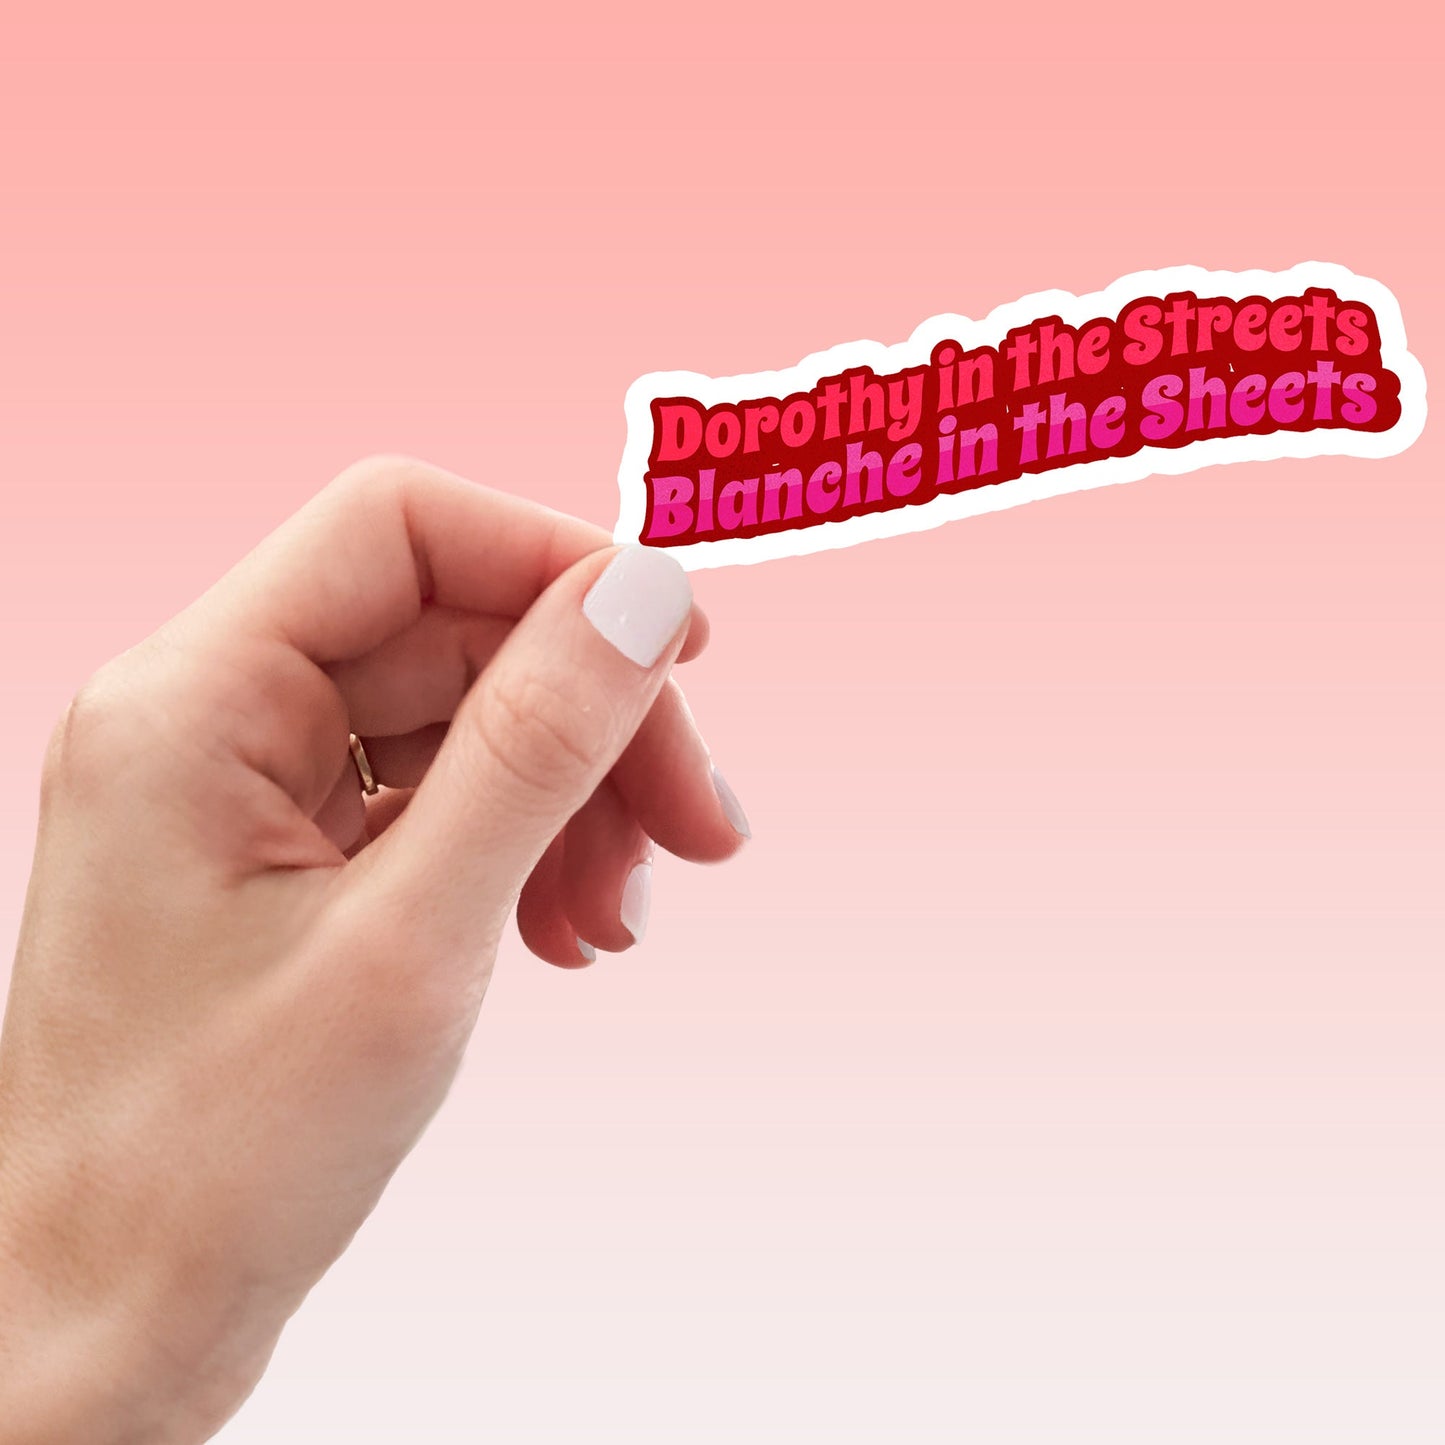 Dorothy in the Streets Blanche in the Sheets Golden Girls Funny Sticker-sticker-Crimson and Clover Studio